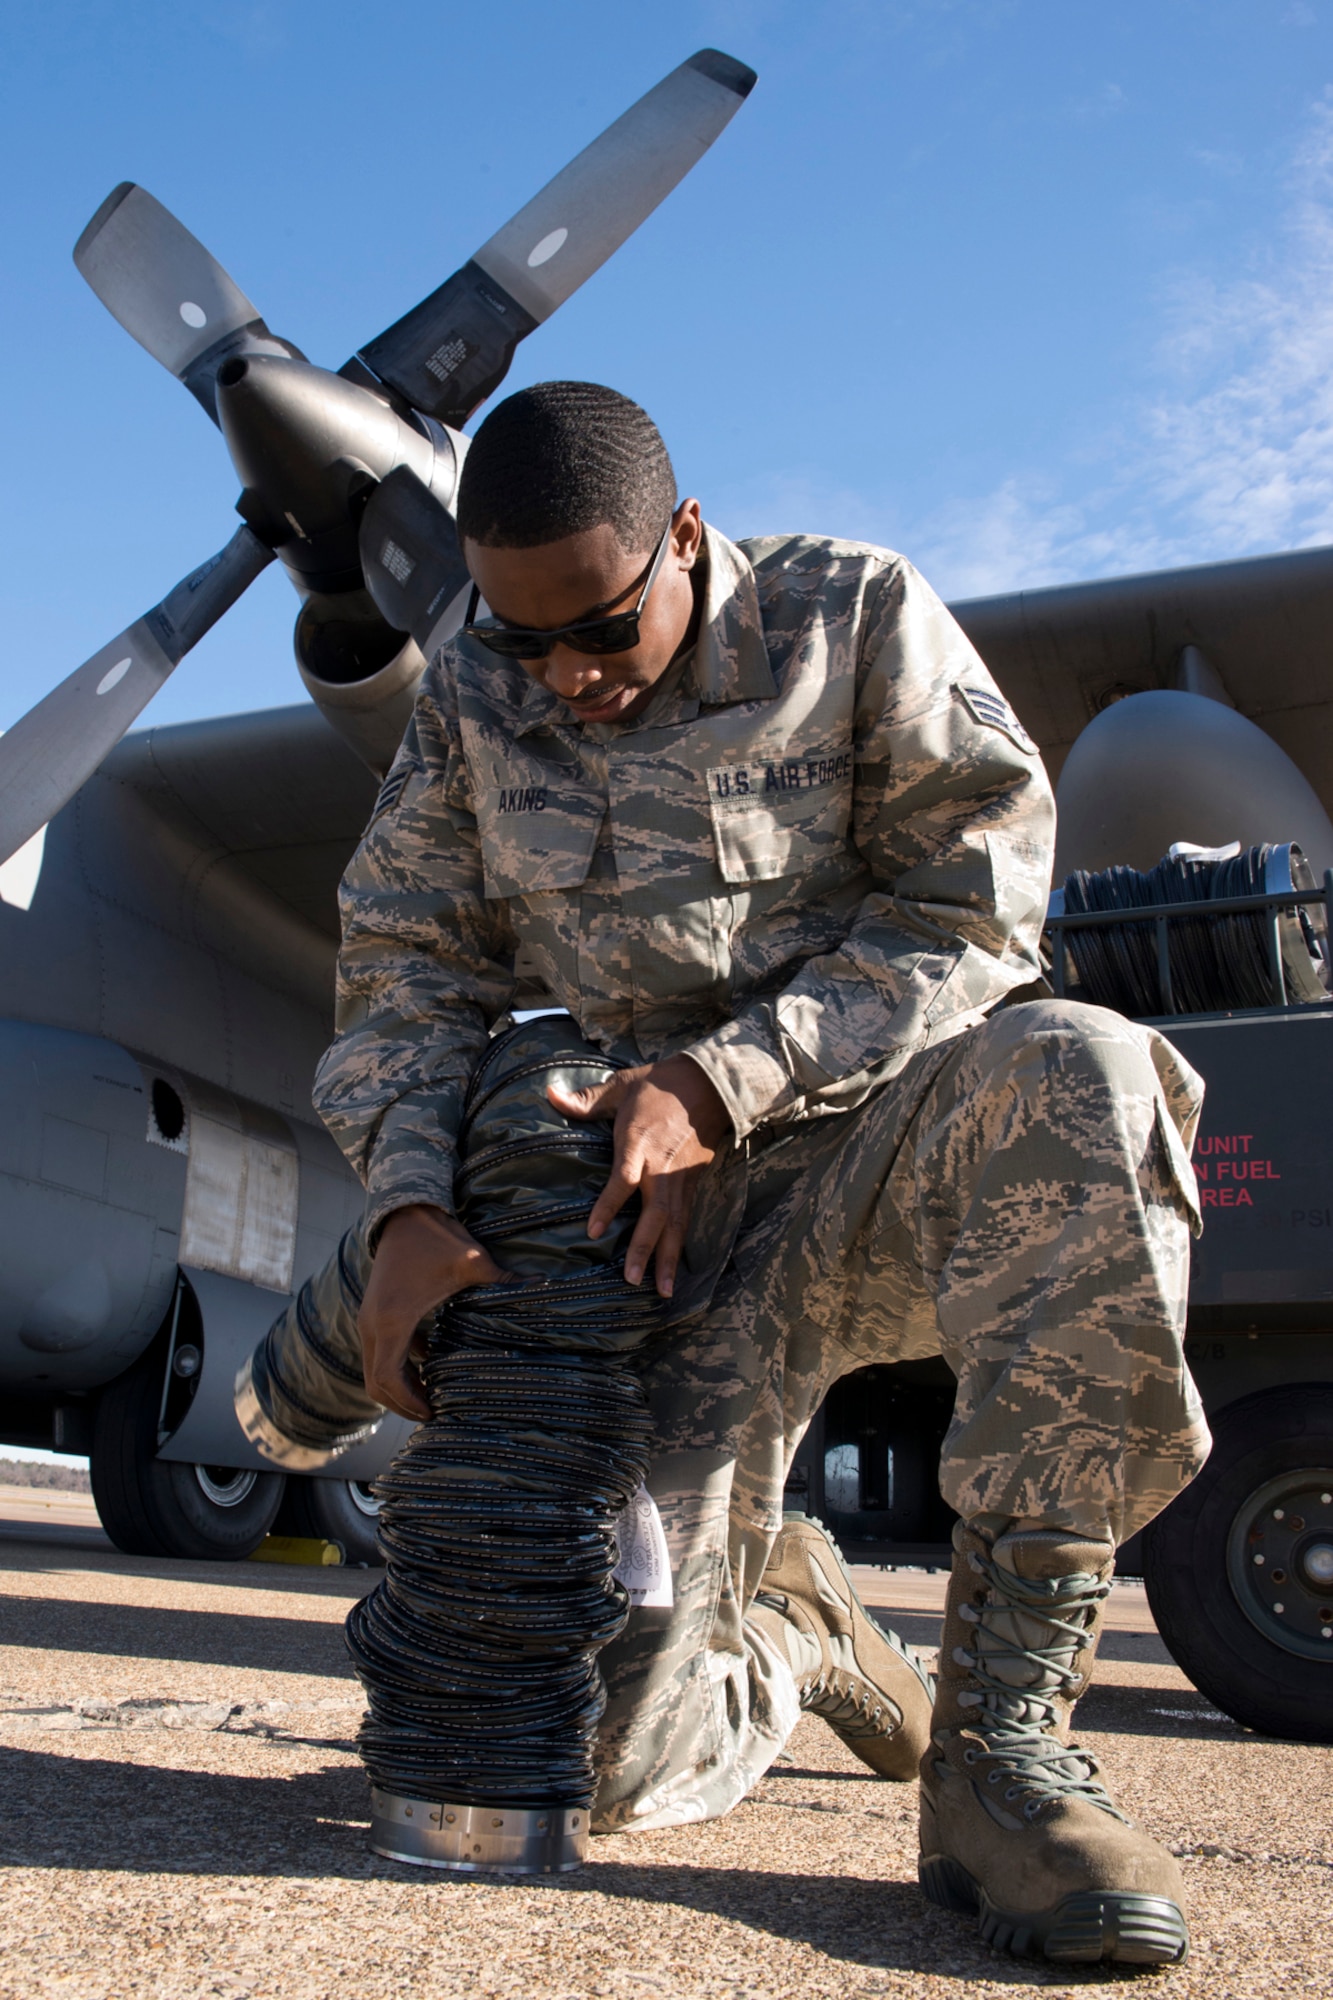 U.S. Air Force Reserve Senior Airman Kquamae Akins, a crew chief assigned to the 913th Maintenance Squadron, compresses a heater hose for storage at Little Rock Air Force Base, Ark., Jan. 28, 2016. Akins was one of six Airmen assigned to the 913 MXS, who were given the opportunity to ride on the final training mission flight of a C-130H for the 913th Airlift Group at Little Rock AFB. (U.S. Air Force photo by Master Sgt. Jeff Walston/Released)